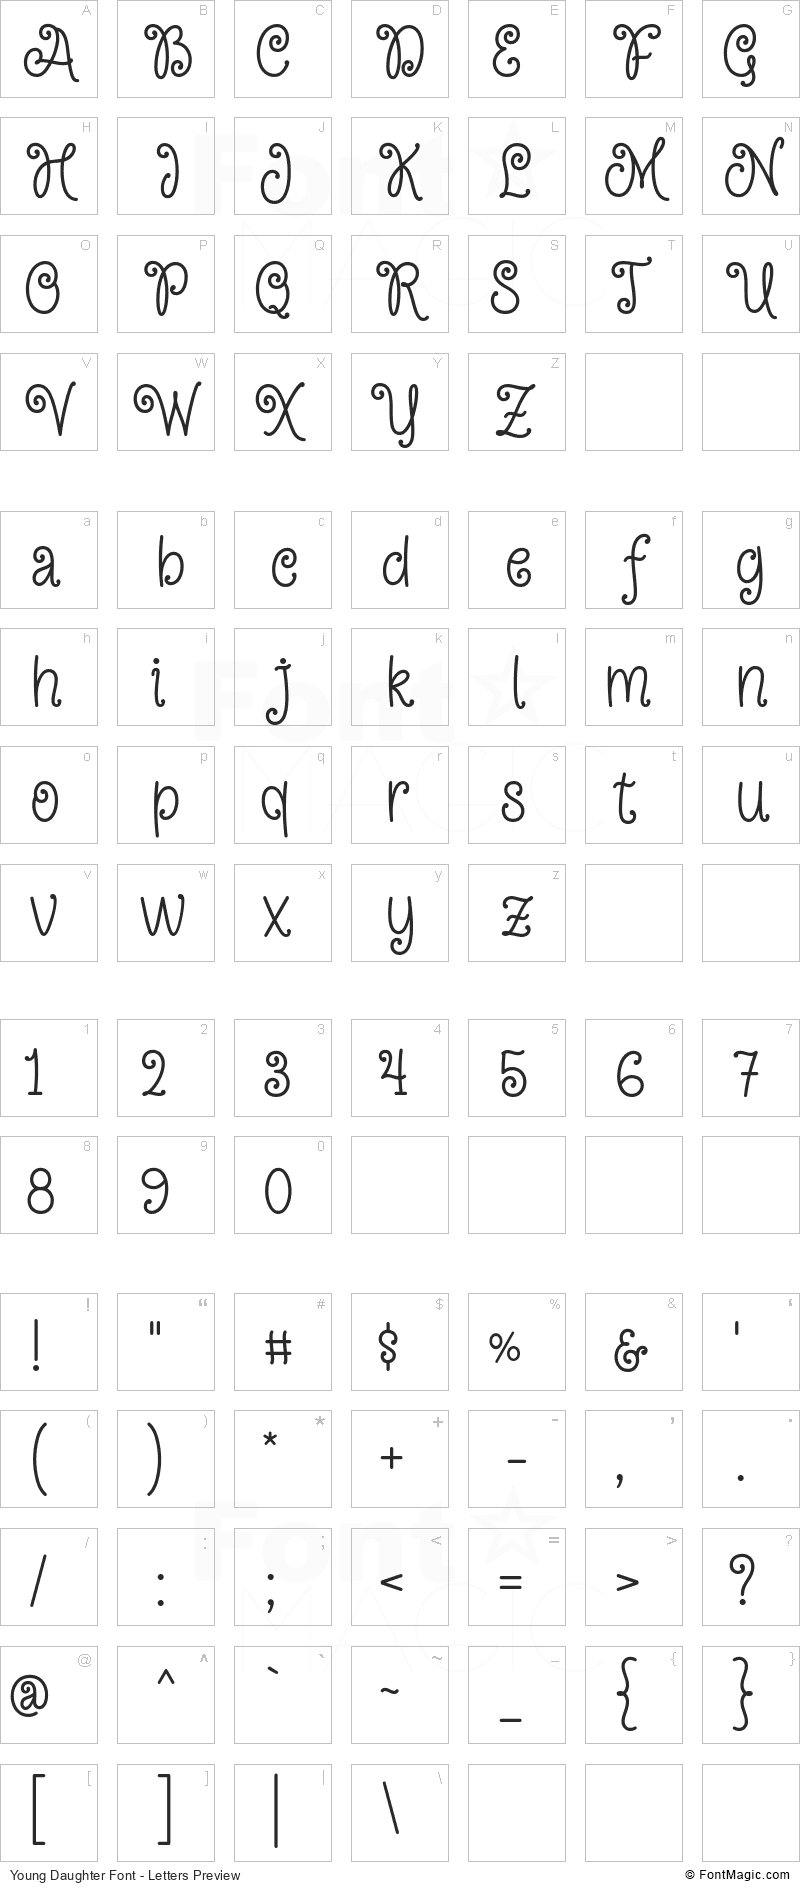 Young Daughter Font - All Latters Preview Chart